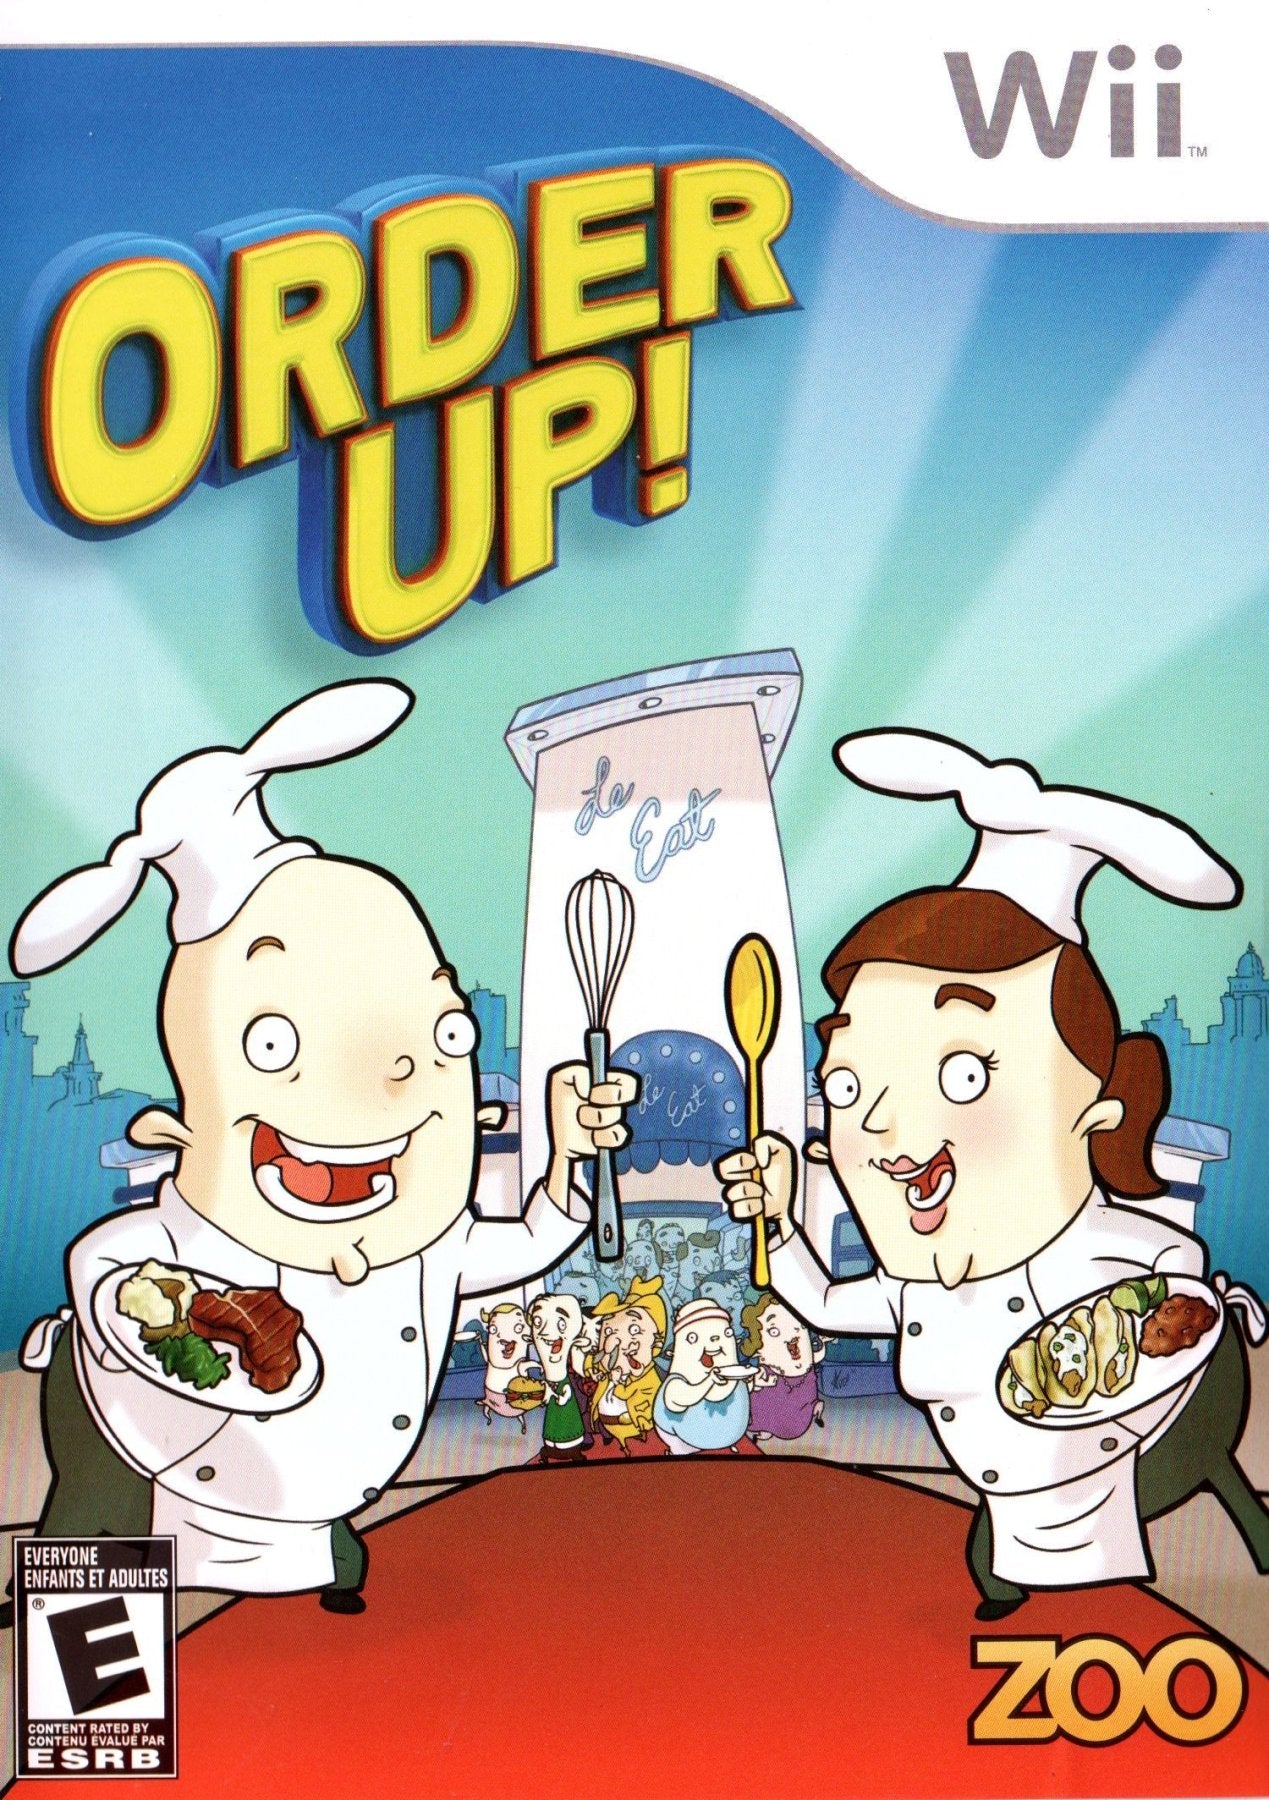 Order Up - Wii - Retro Island Gaming